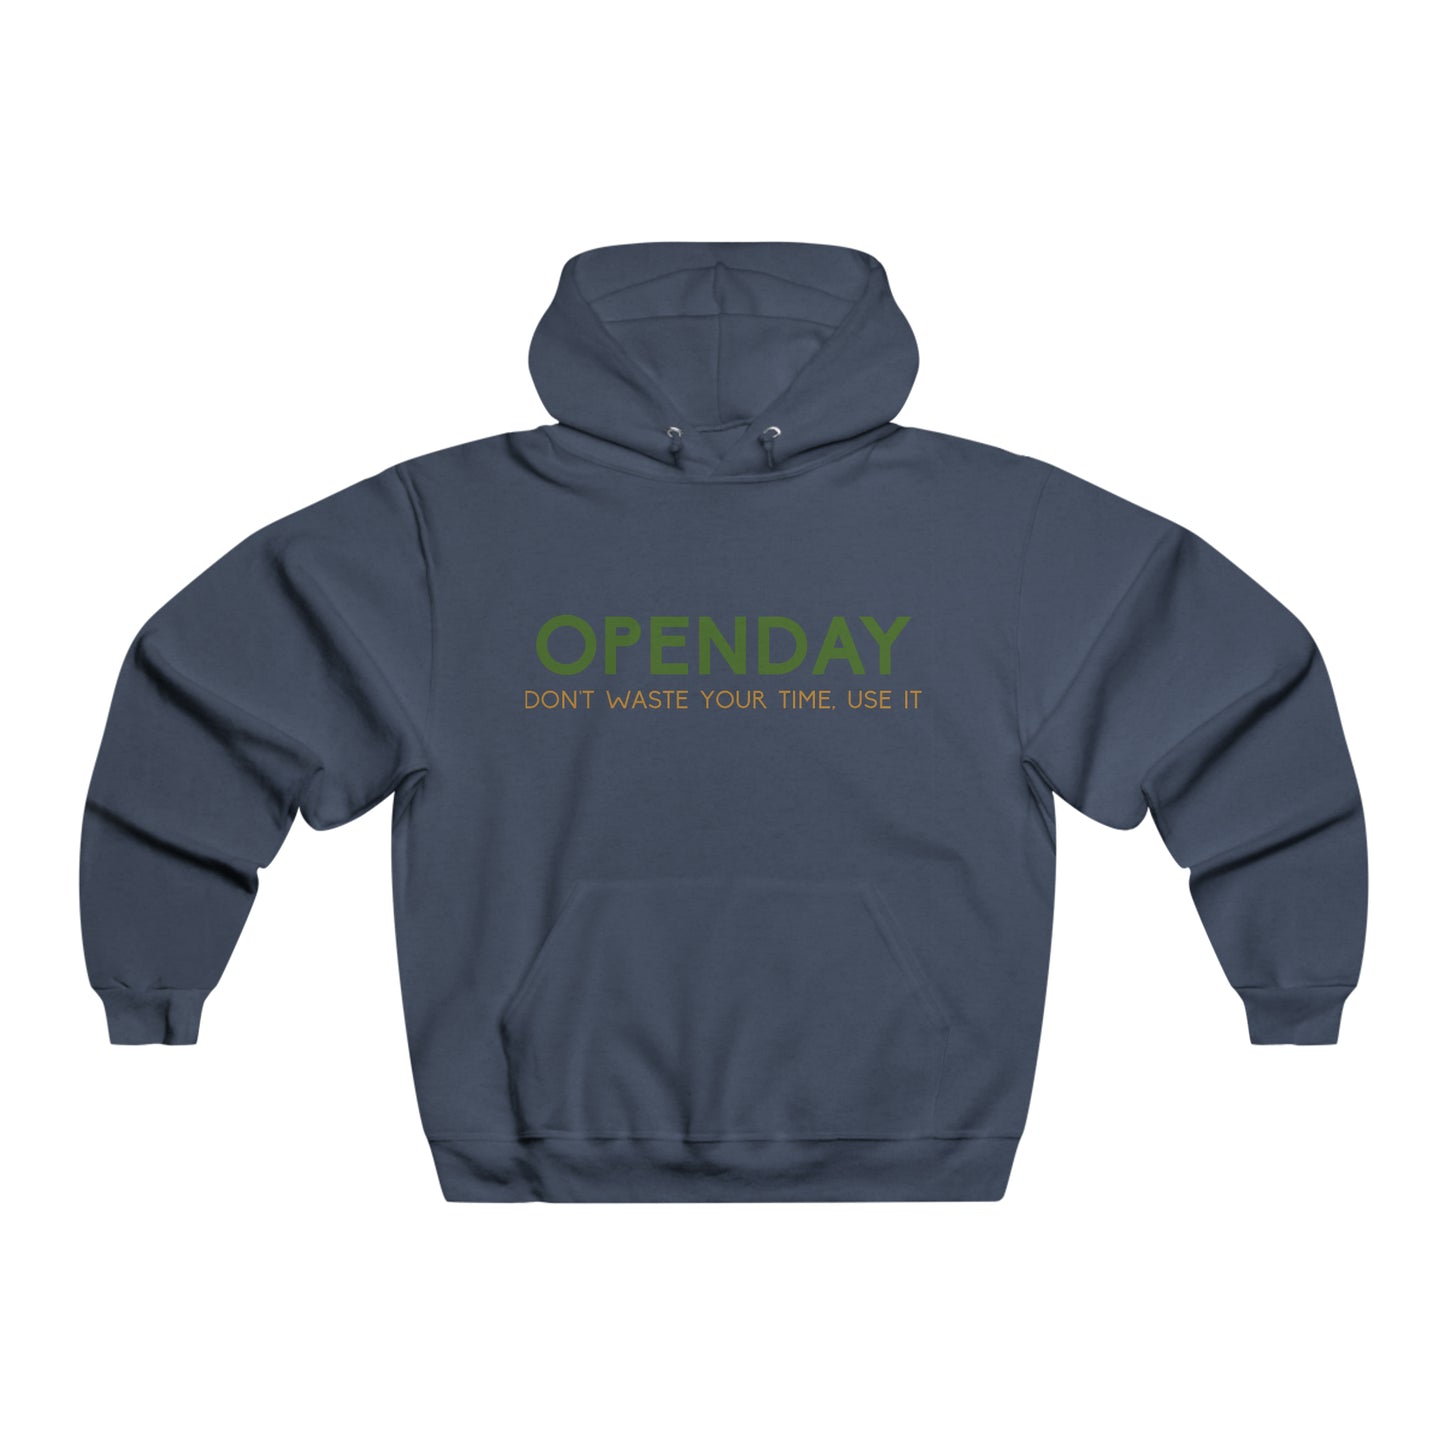 Don't waste your time, use it - Unisex Hooded Sweatshirt